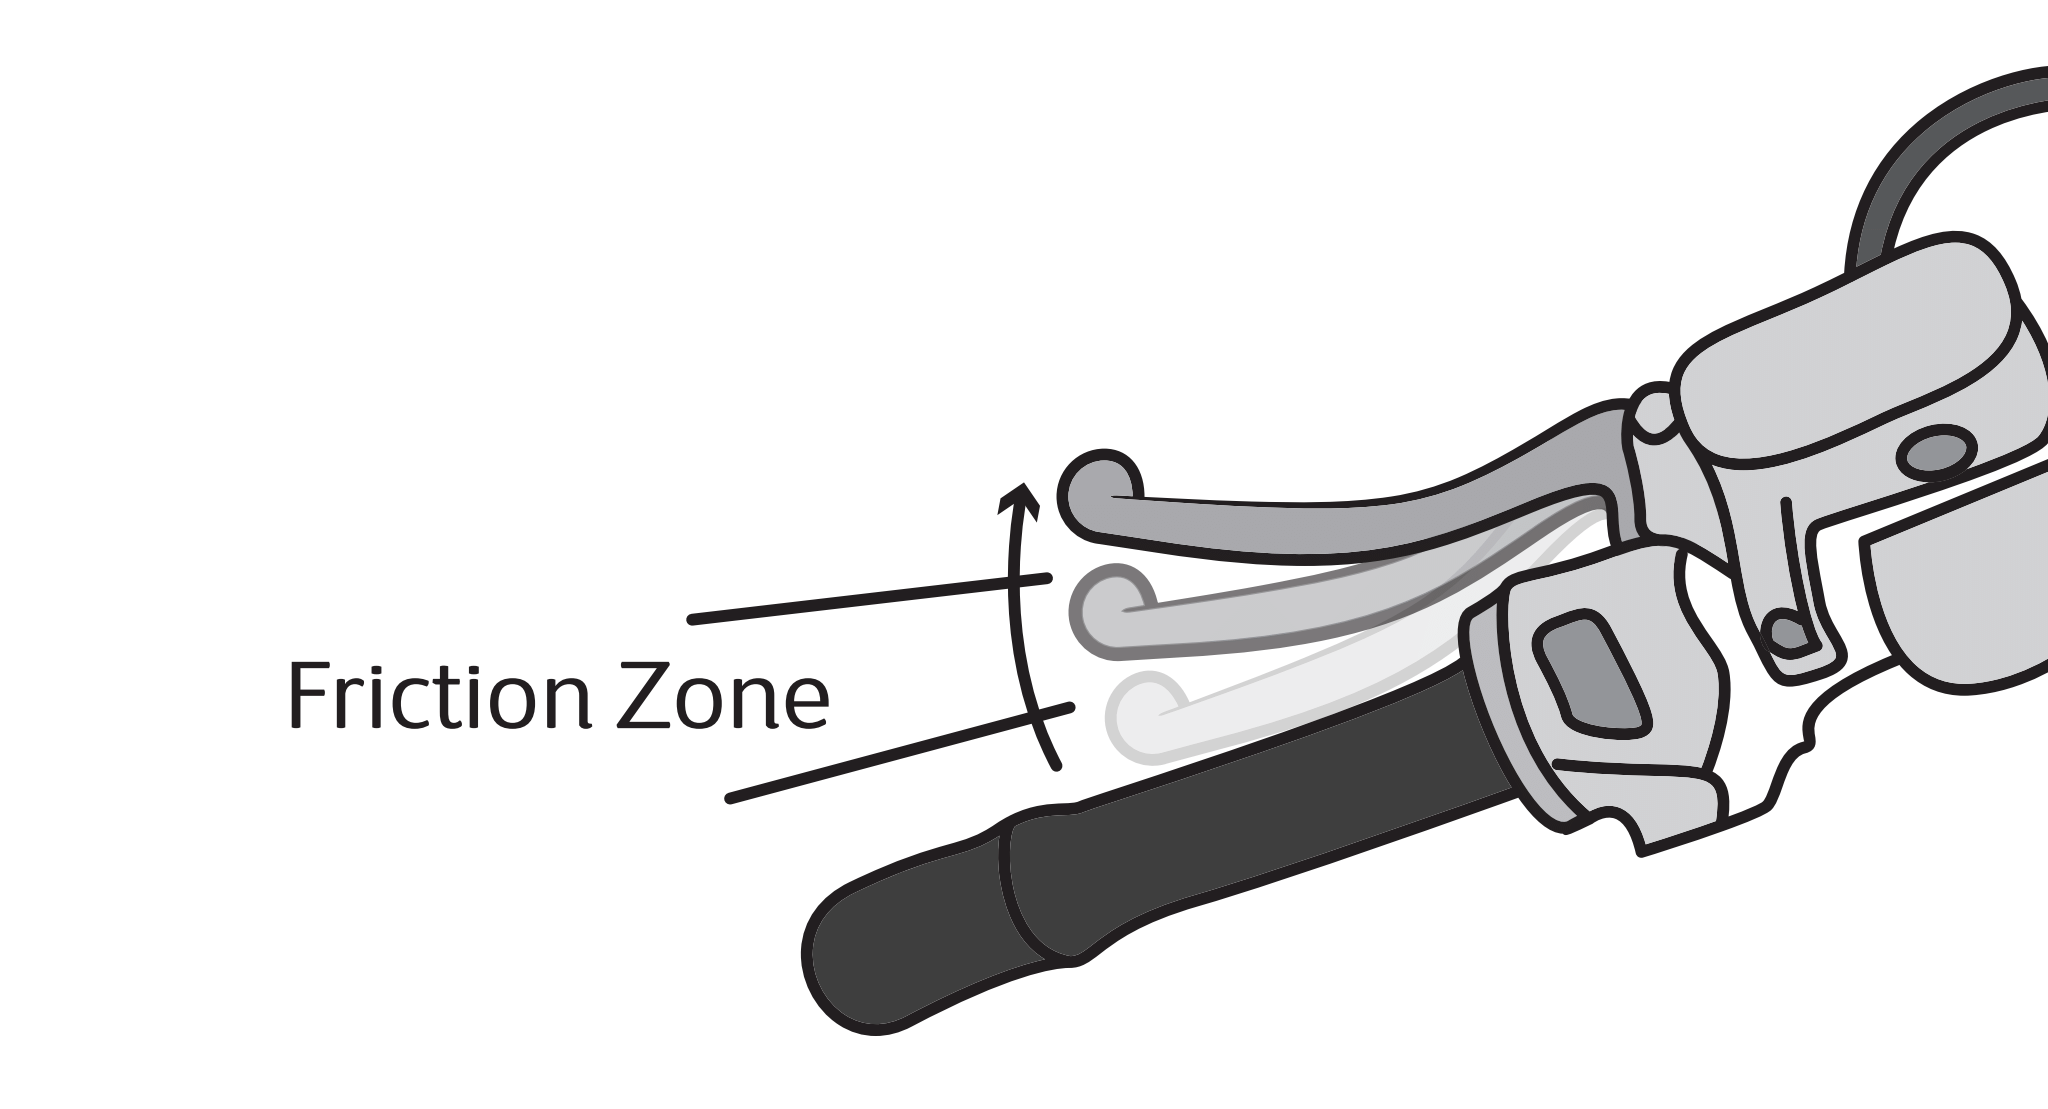 image of the friction zone on a motorcycle handle bar